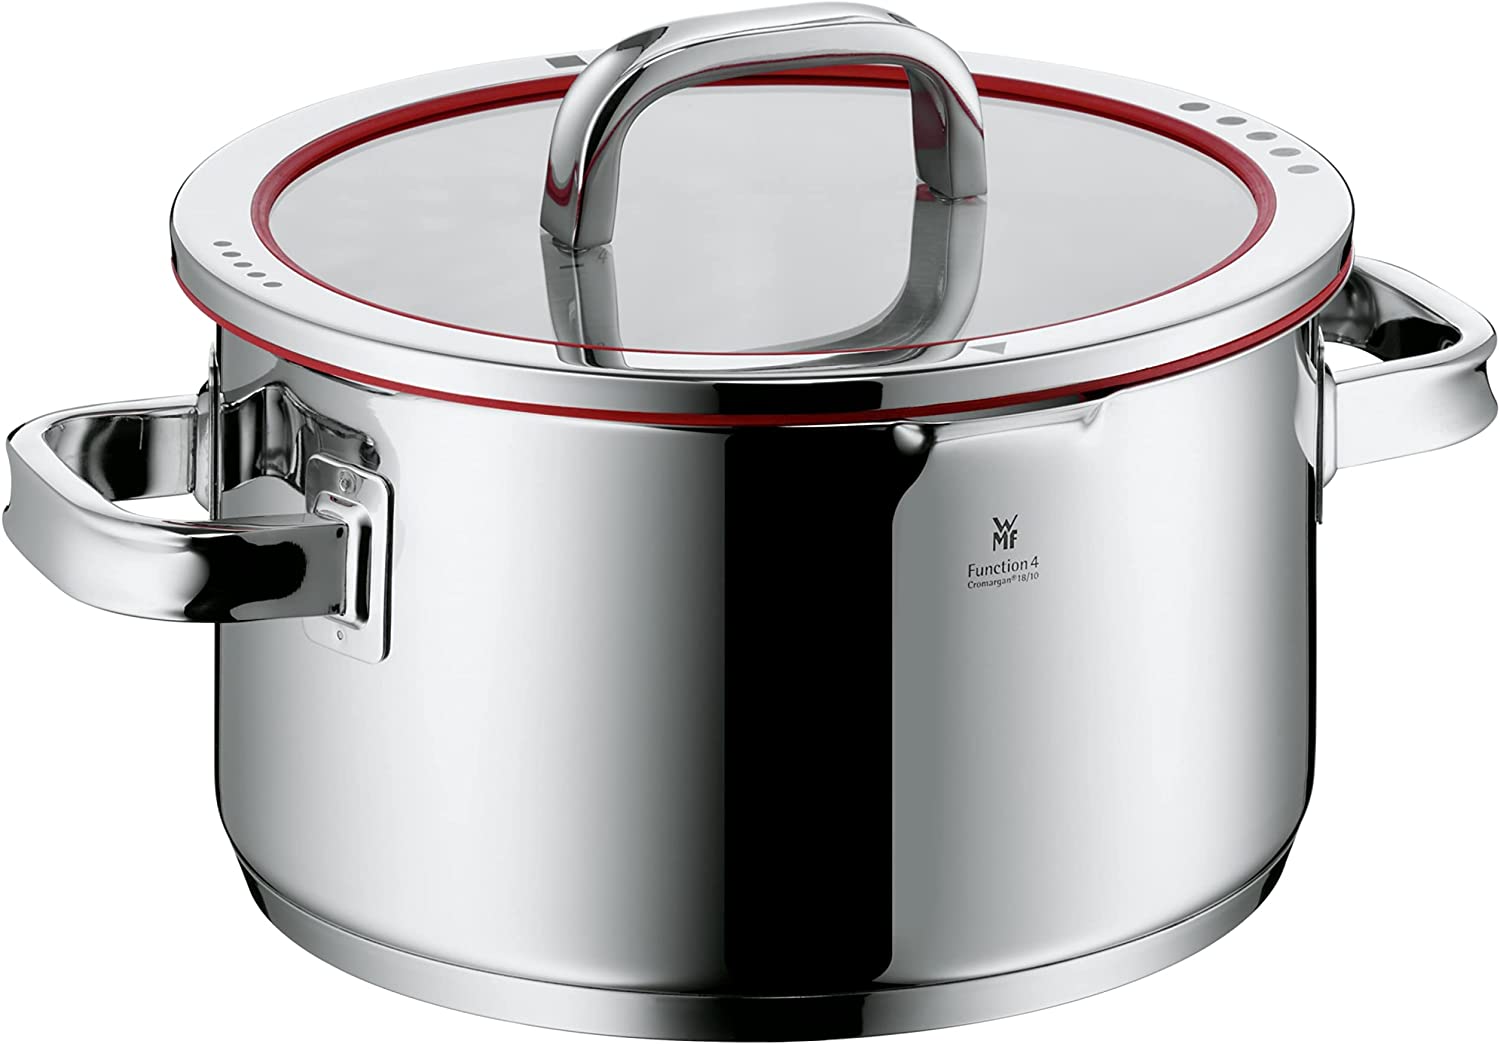 WMF cookware Ø 24 cm approx. 5,7l Function 4 Inside scaling lid - pour off or decant liquids without spilling to keep your dishes and cooker clean. Hollow side handles glass lid Cromargan stainless steel brushed suitable for all stove tops including induction dishwasher-safe